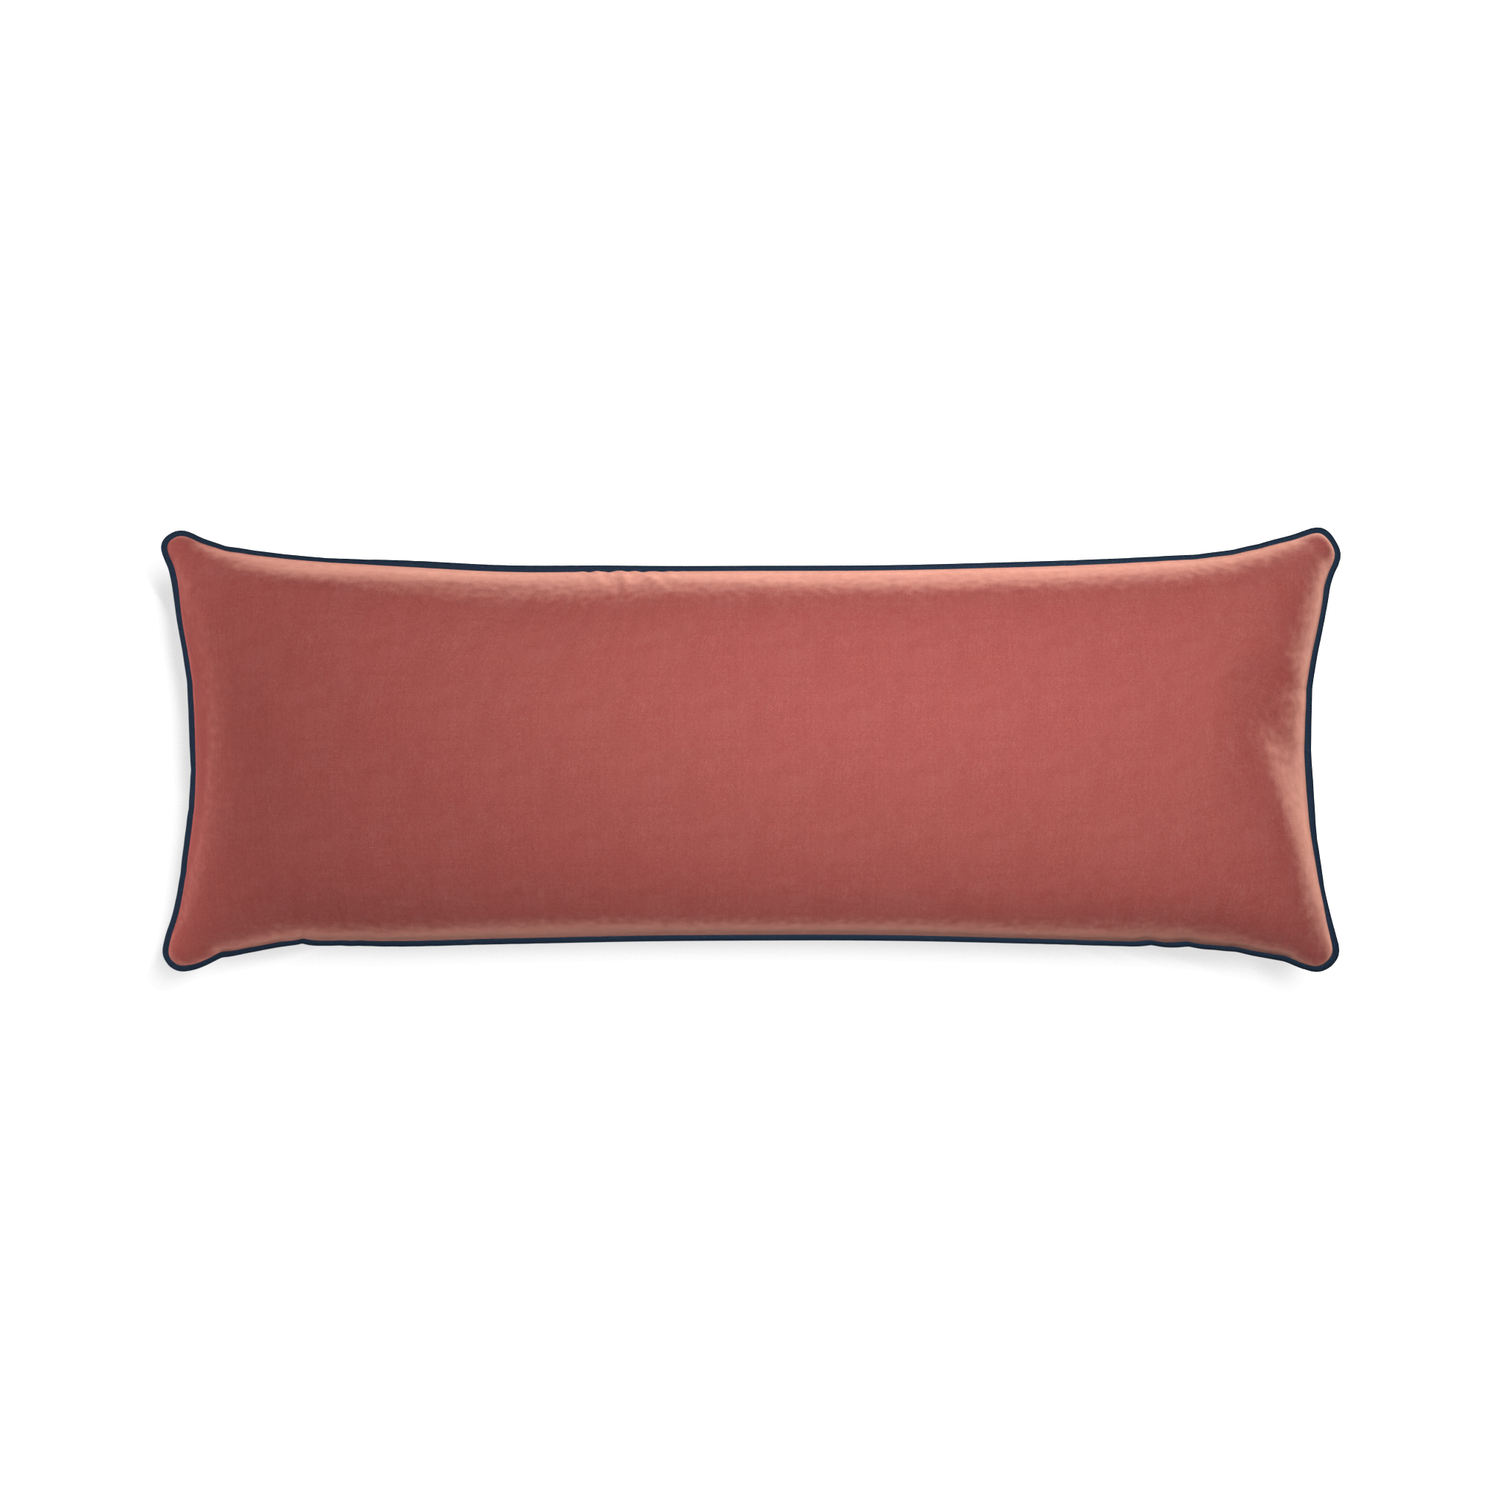 Xl-lumbar cosmo velvet custom coralpillow with c piping on white background